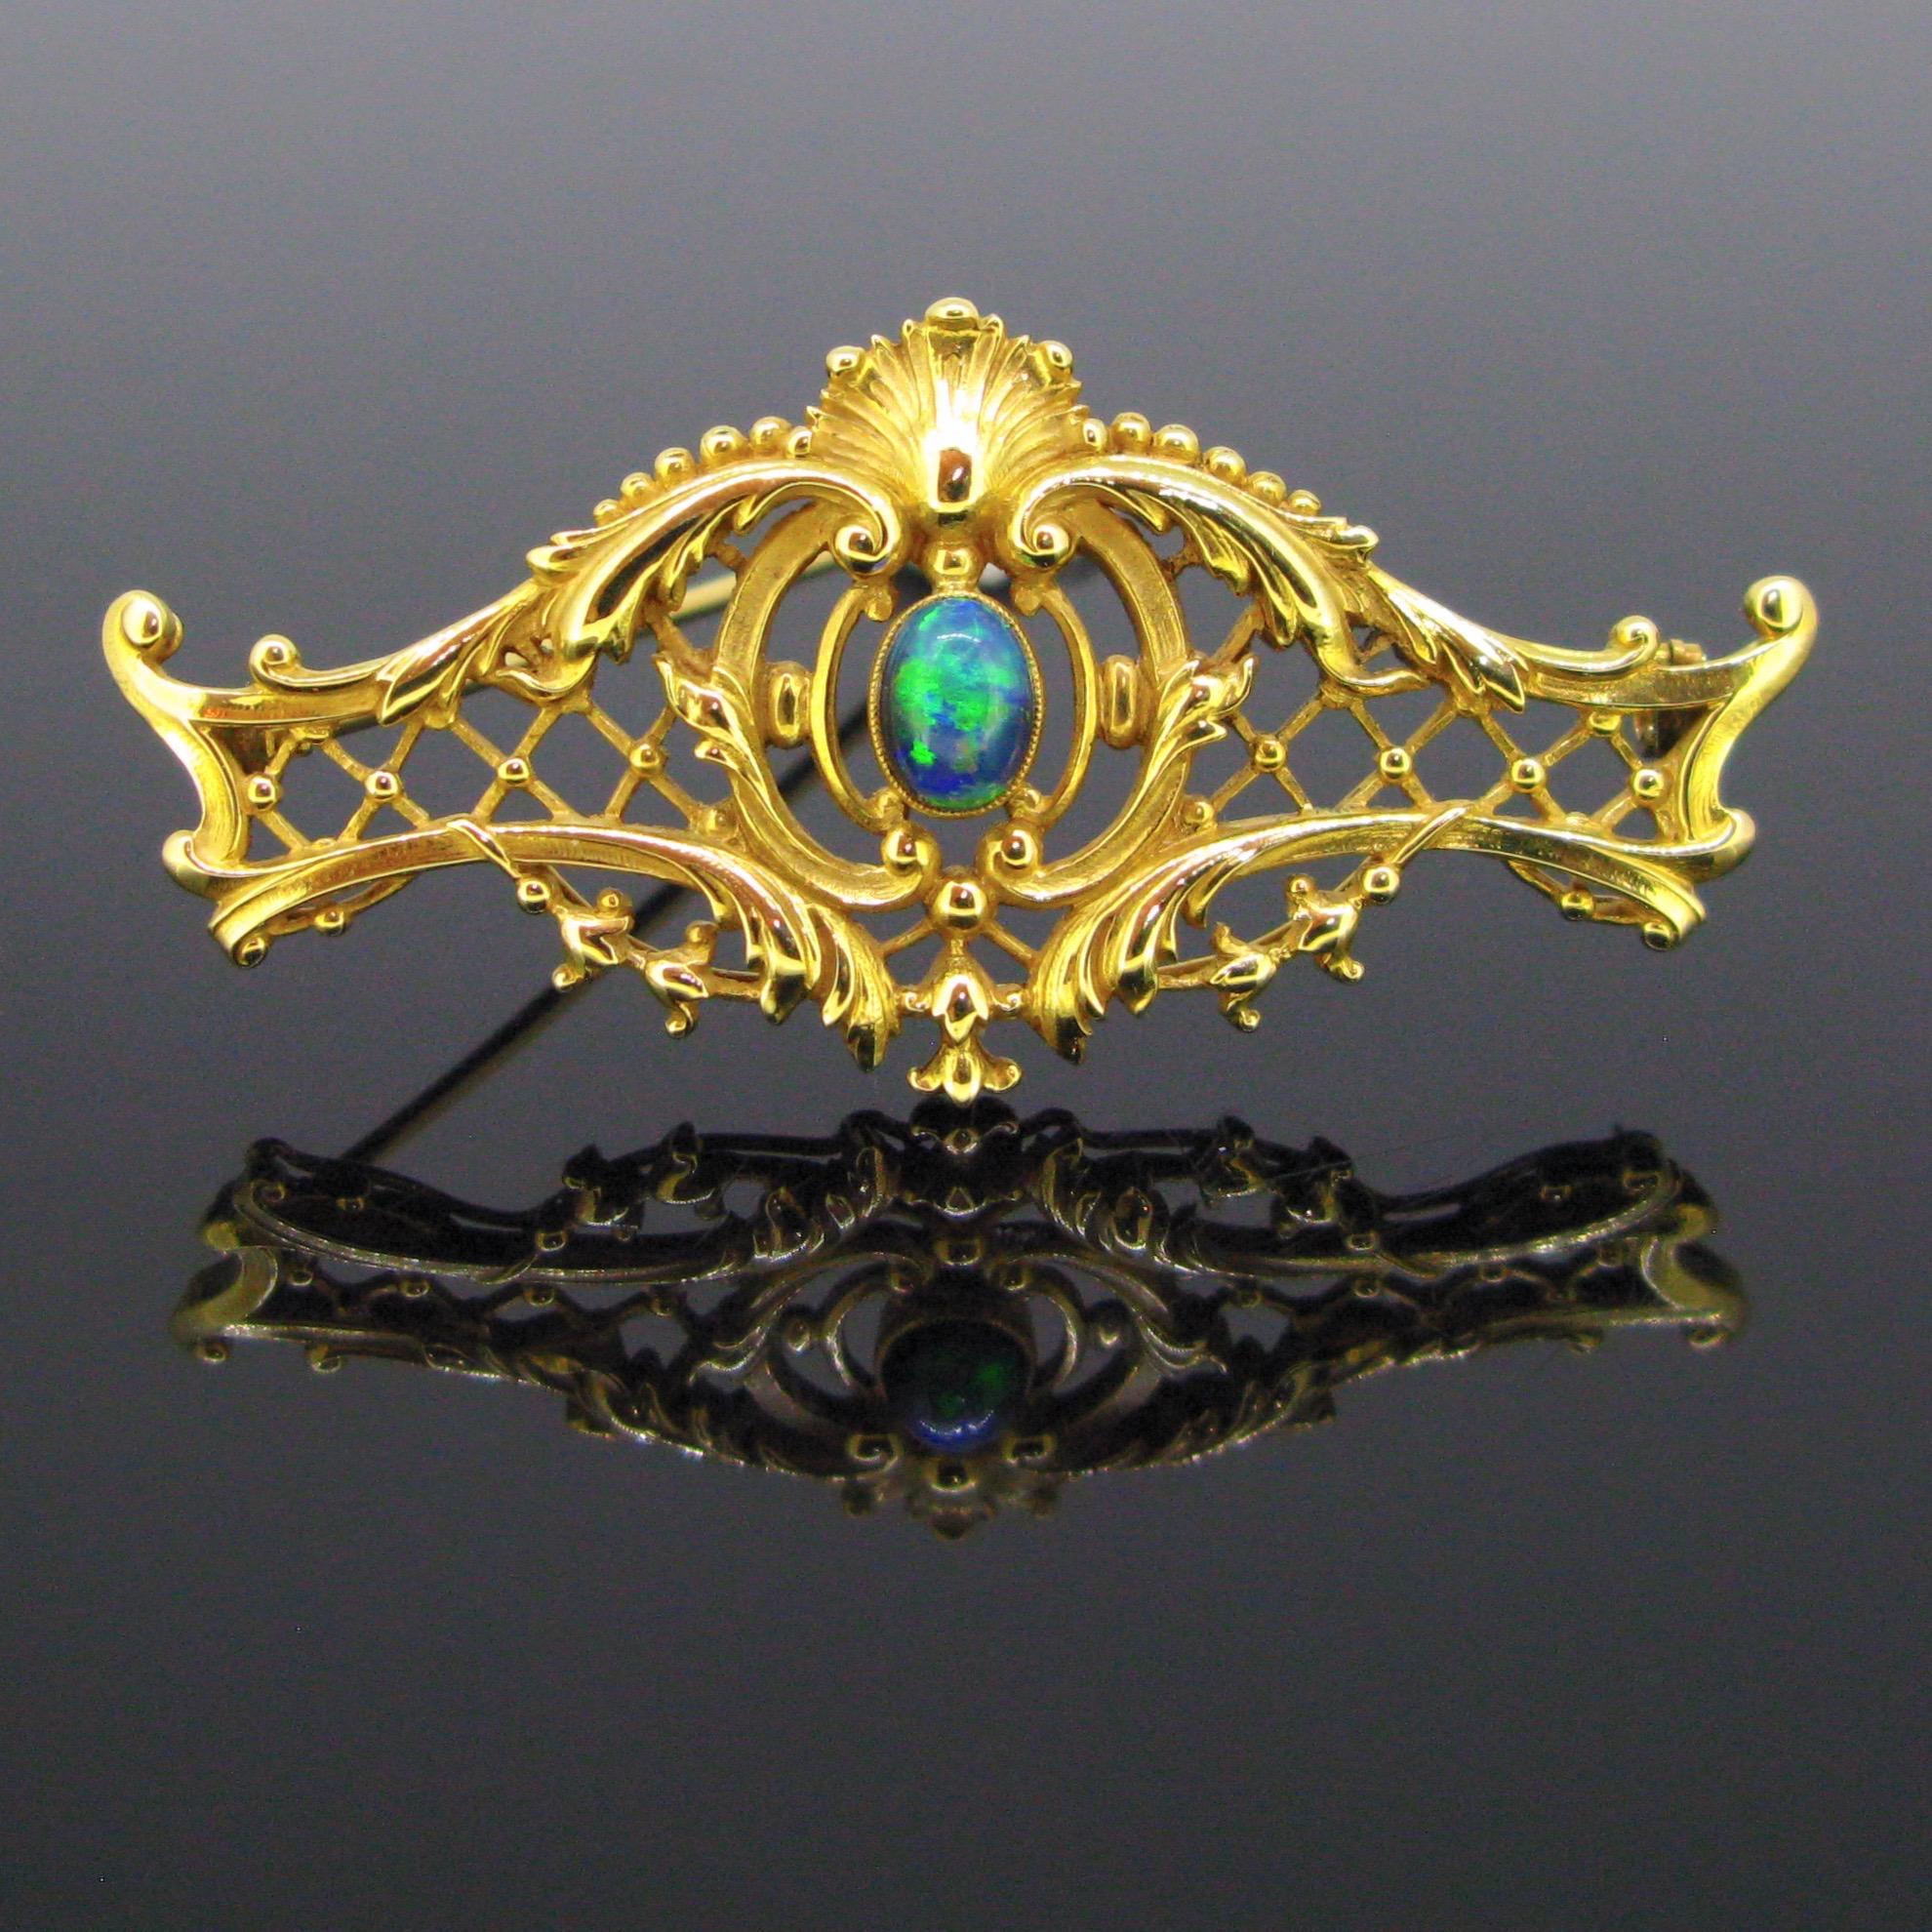 This beautiful brooch is from the Art Nouveau era. It was made circa 1900. It is fullt made in 18kt yellow gold, set with a vibrant black opal in the centre. It has a very nice design with flowers and volutes. It is controlled with the French mark